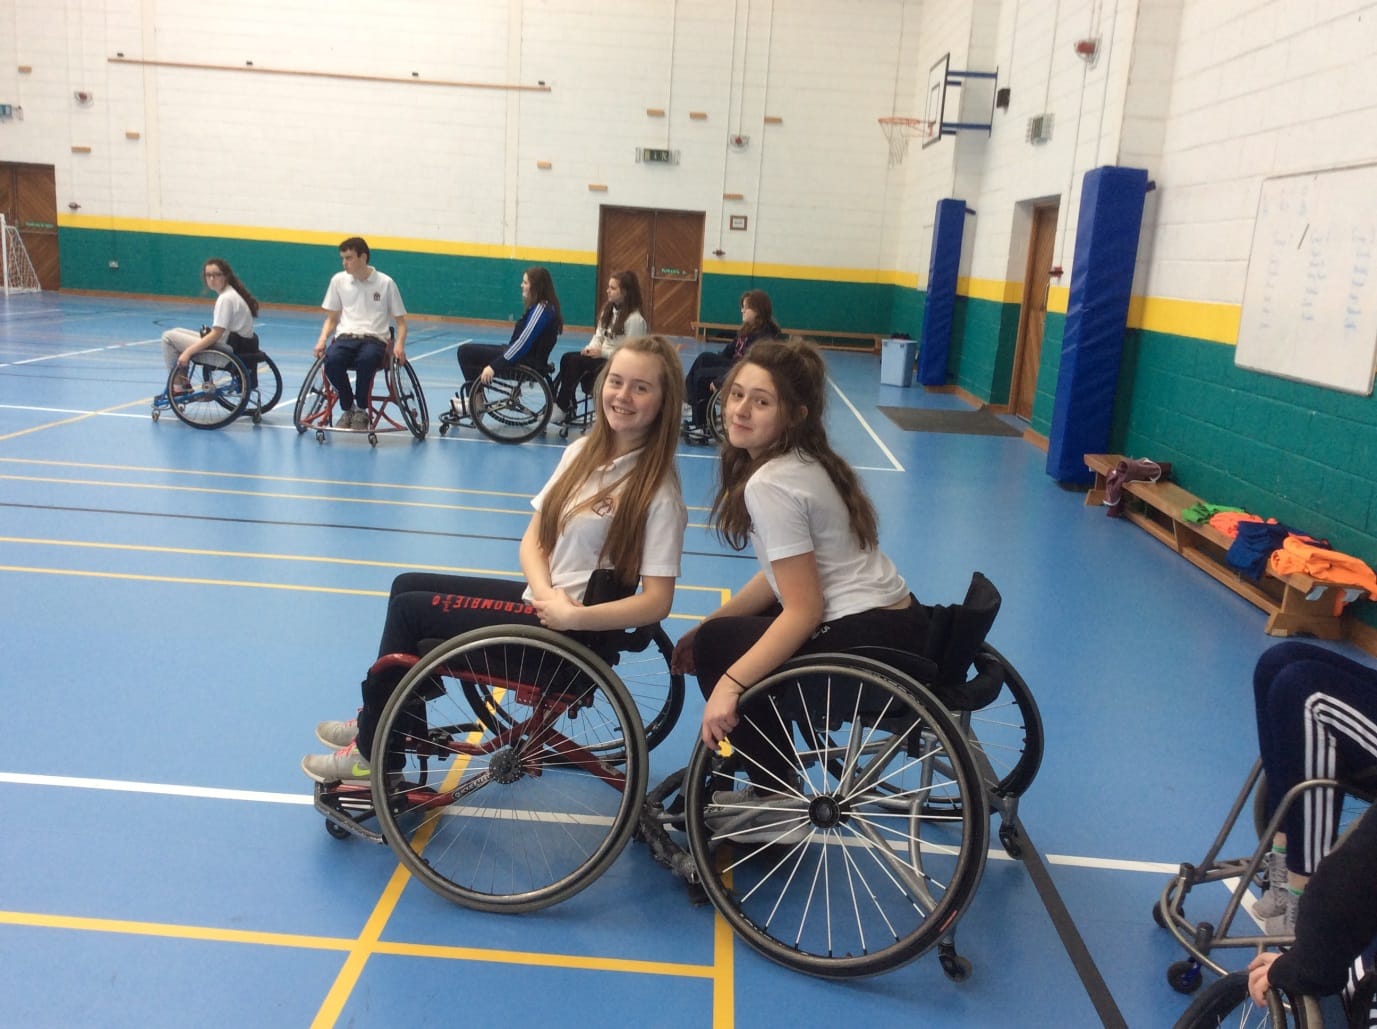 Feb 2016: Wheelchair Basketball Workshop given by the Irish Wheelchair Association for Desmond College Transition Year Students